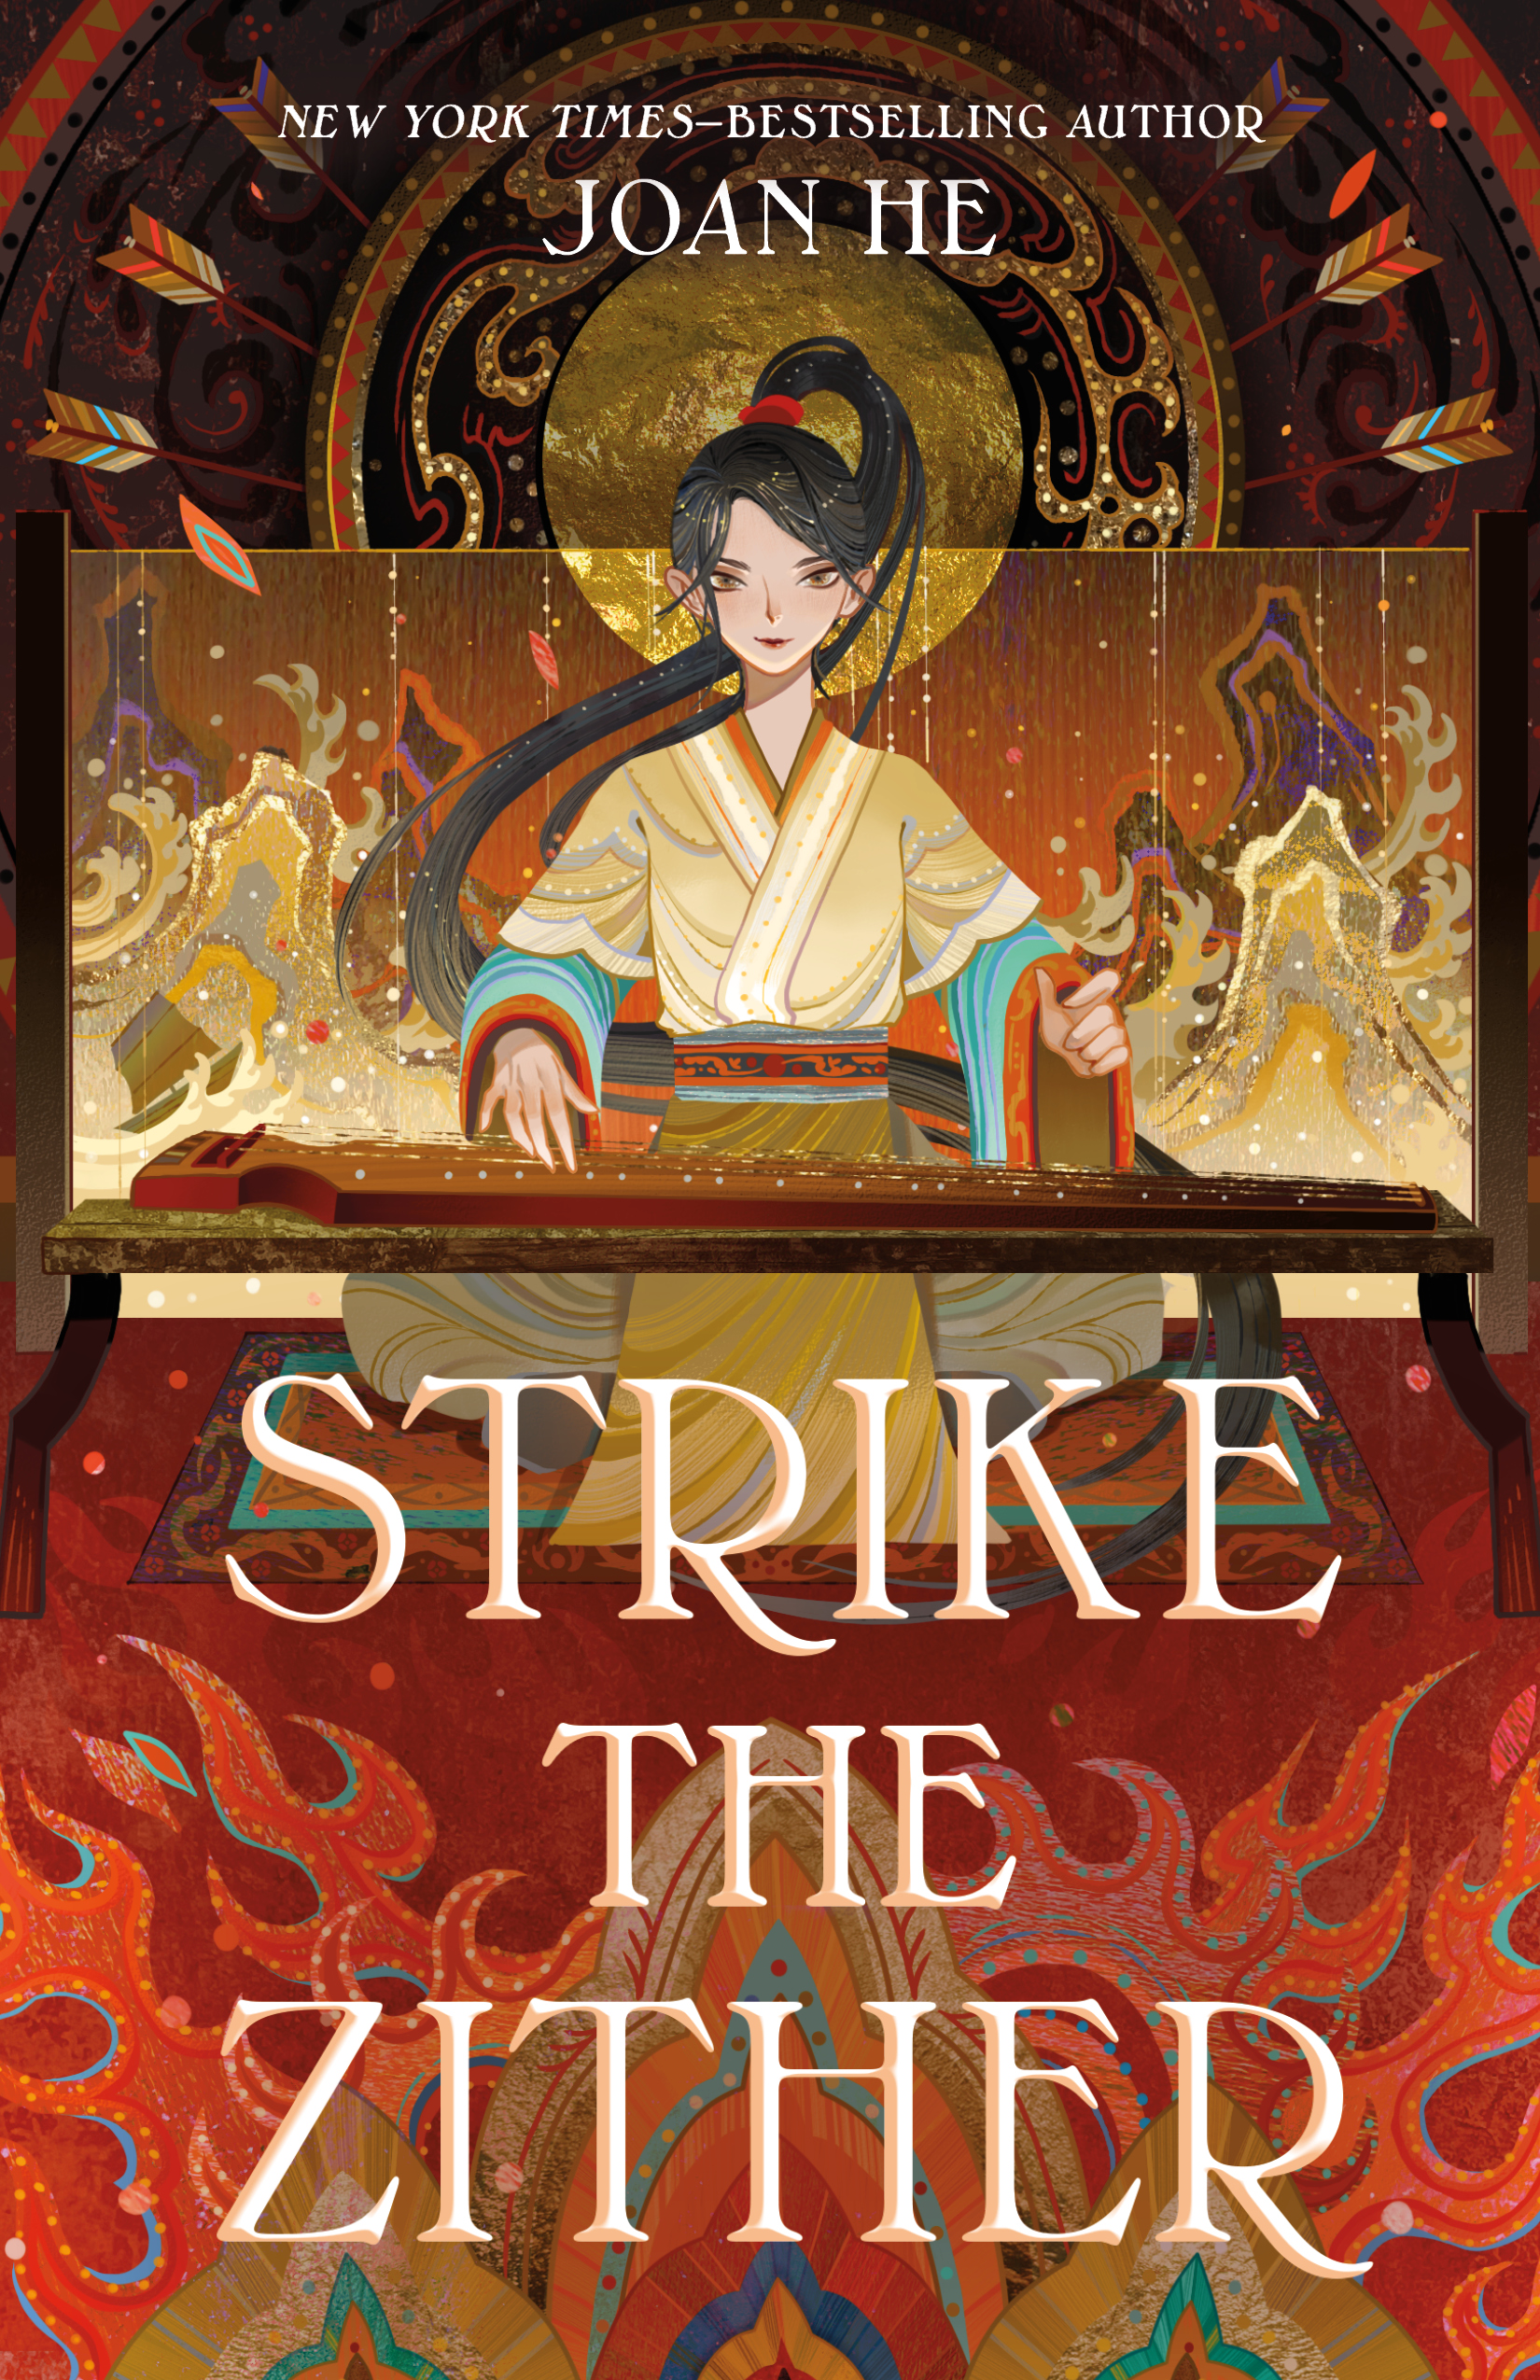 Book Strike the Zither